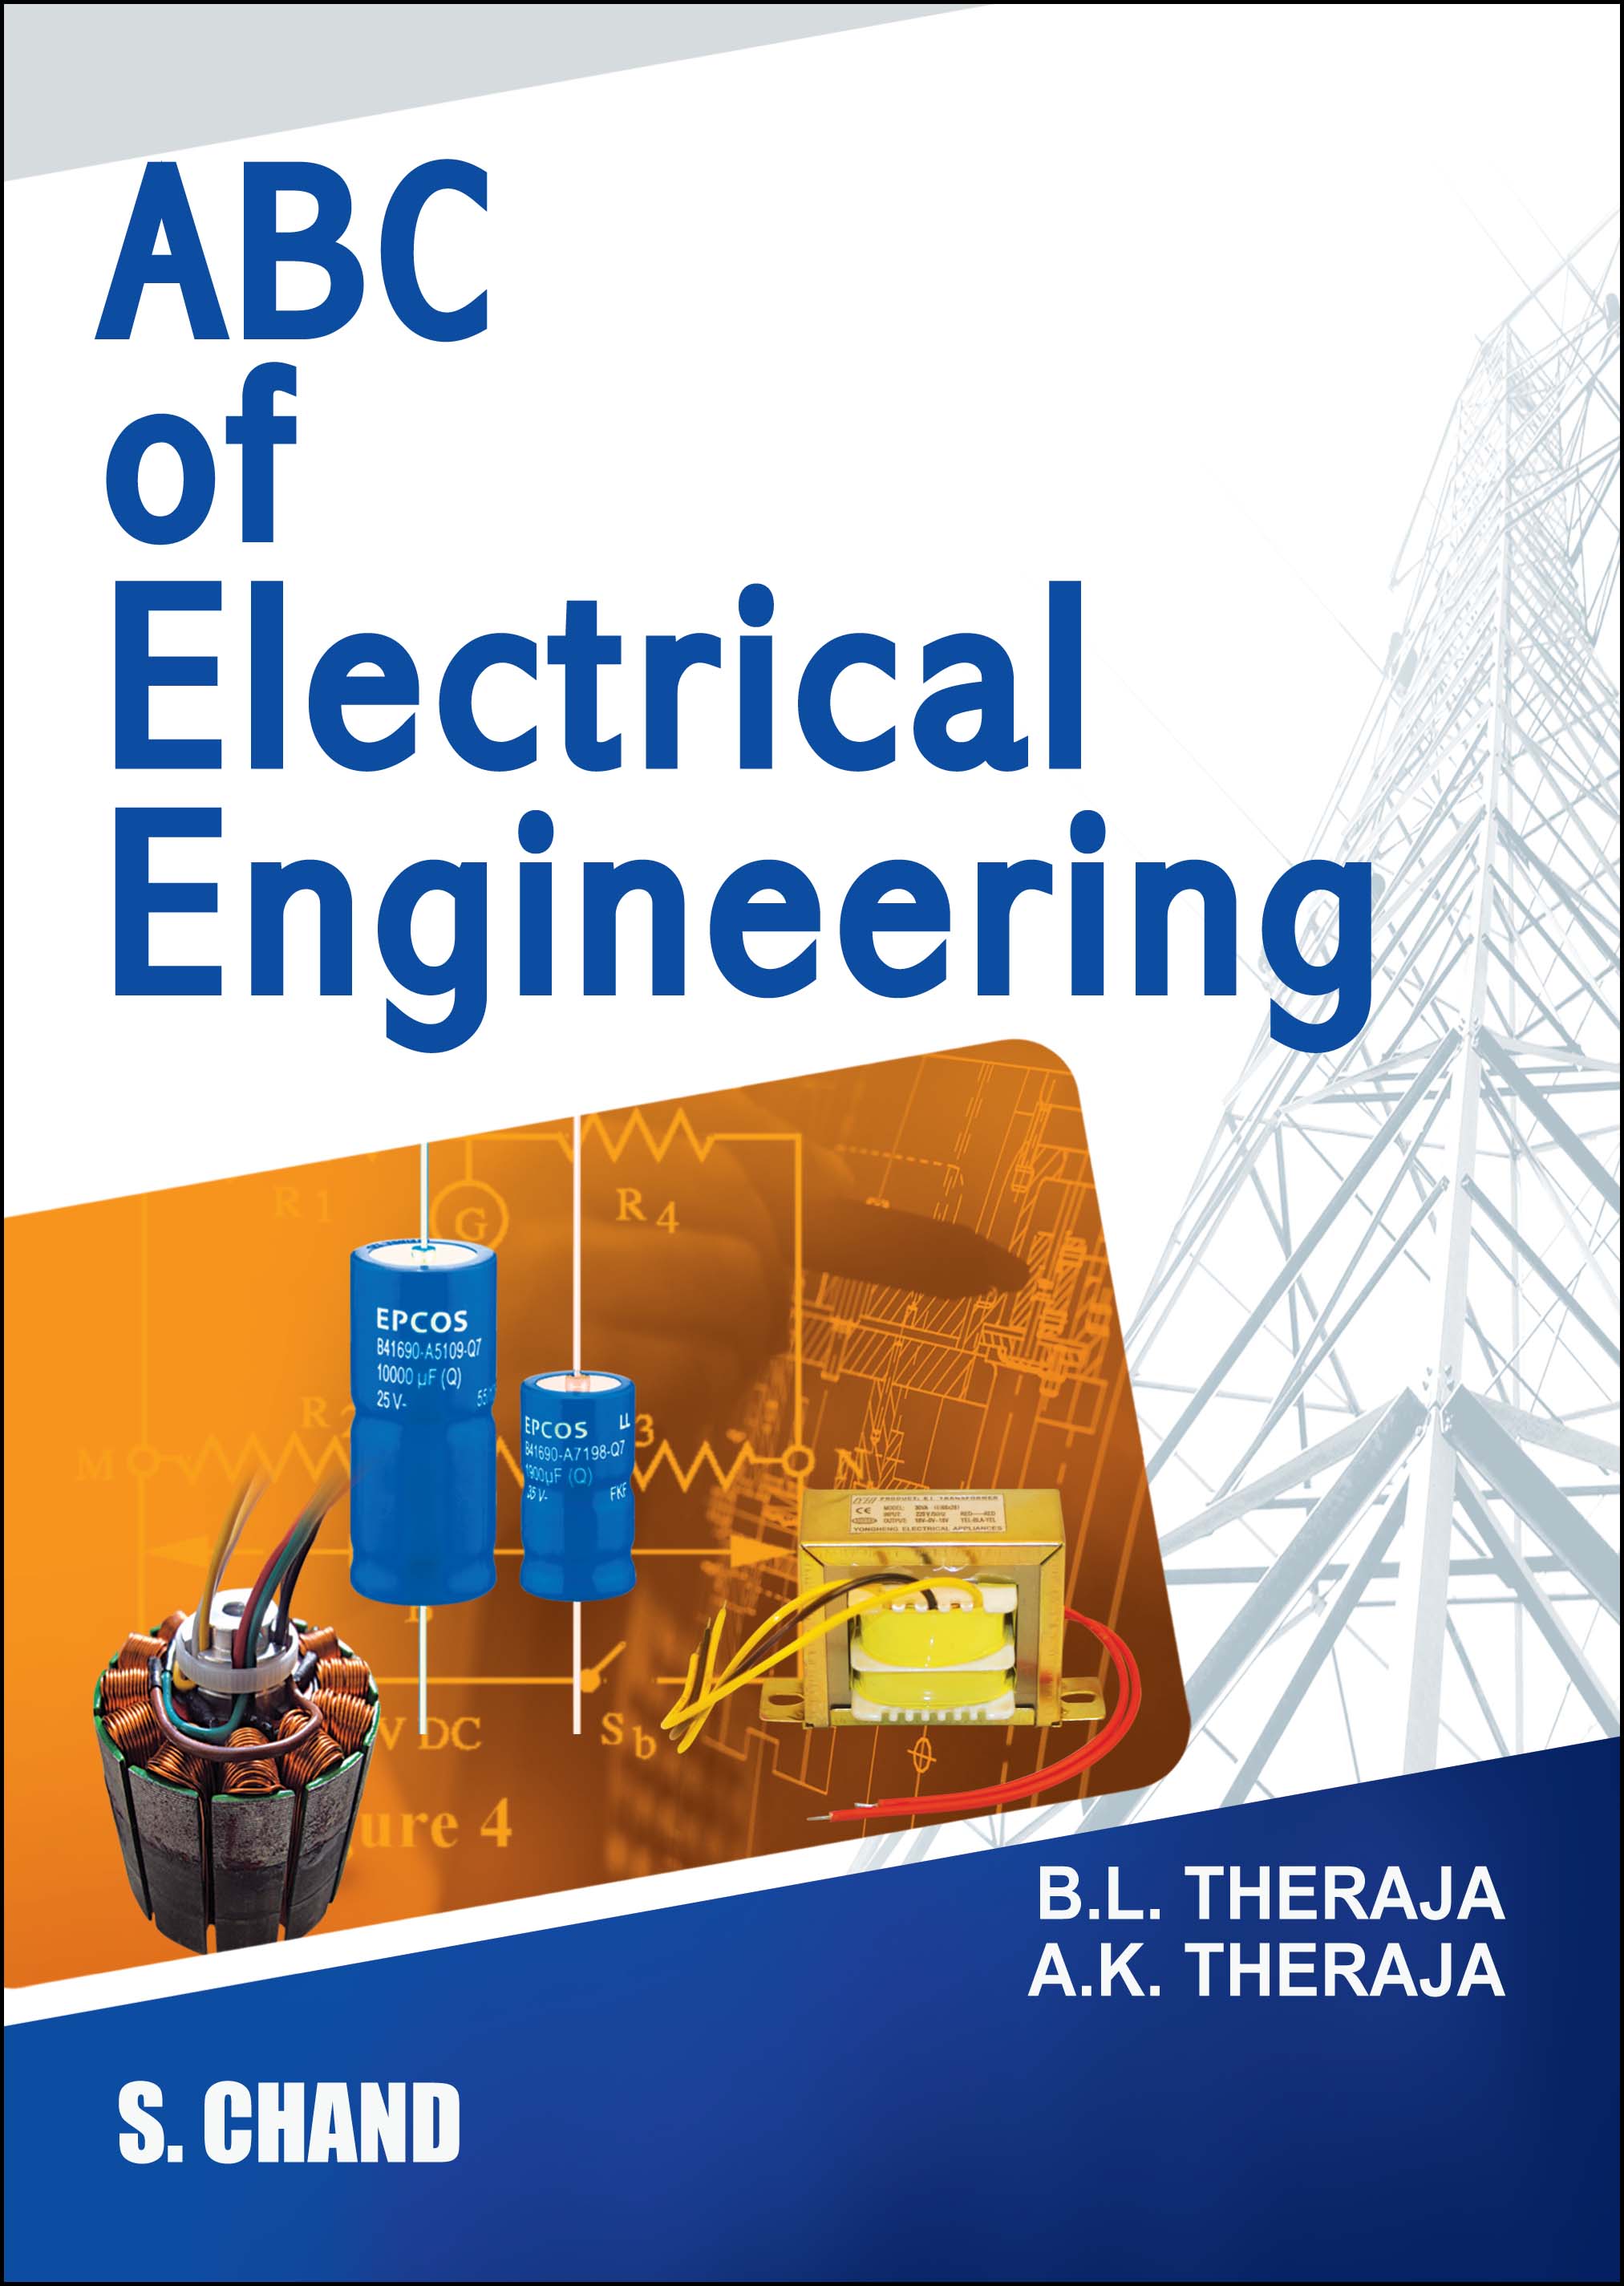 ABC OF ELECTRICAL ENGINEERING